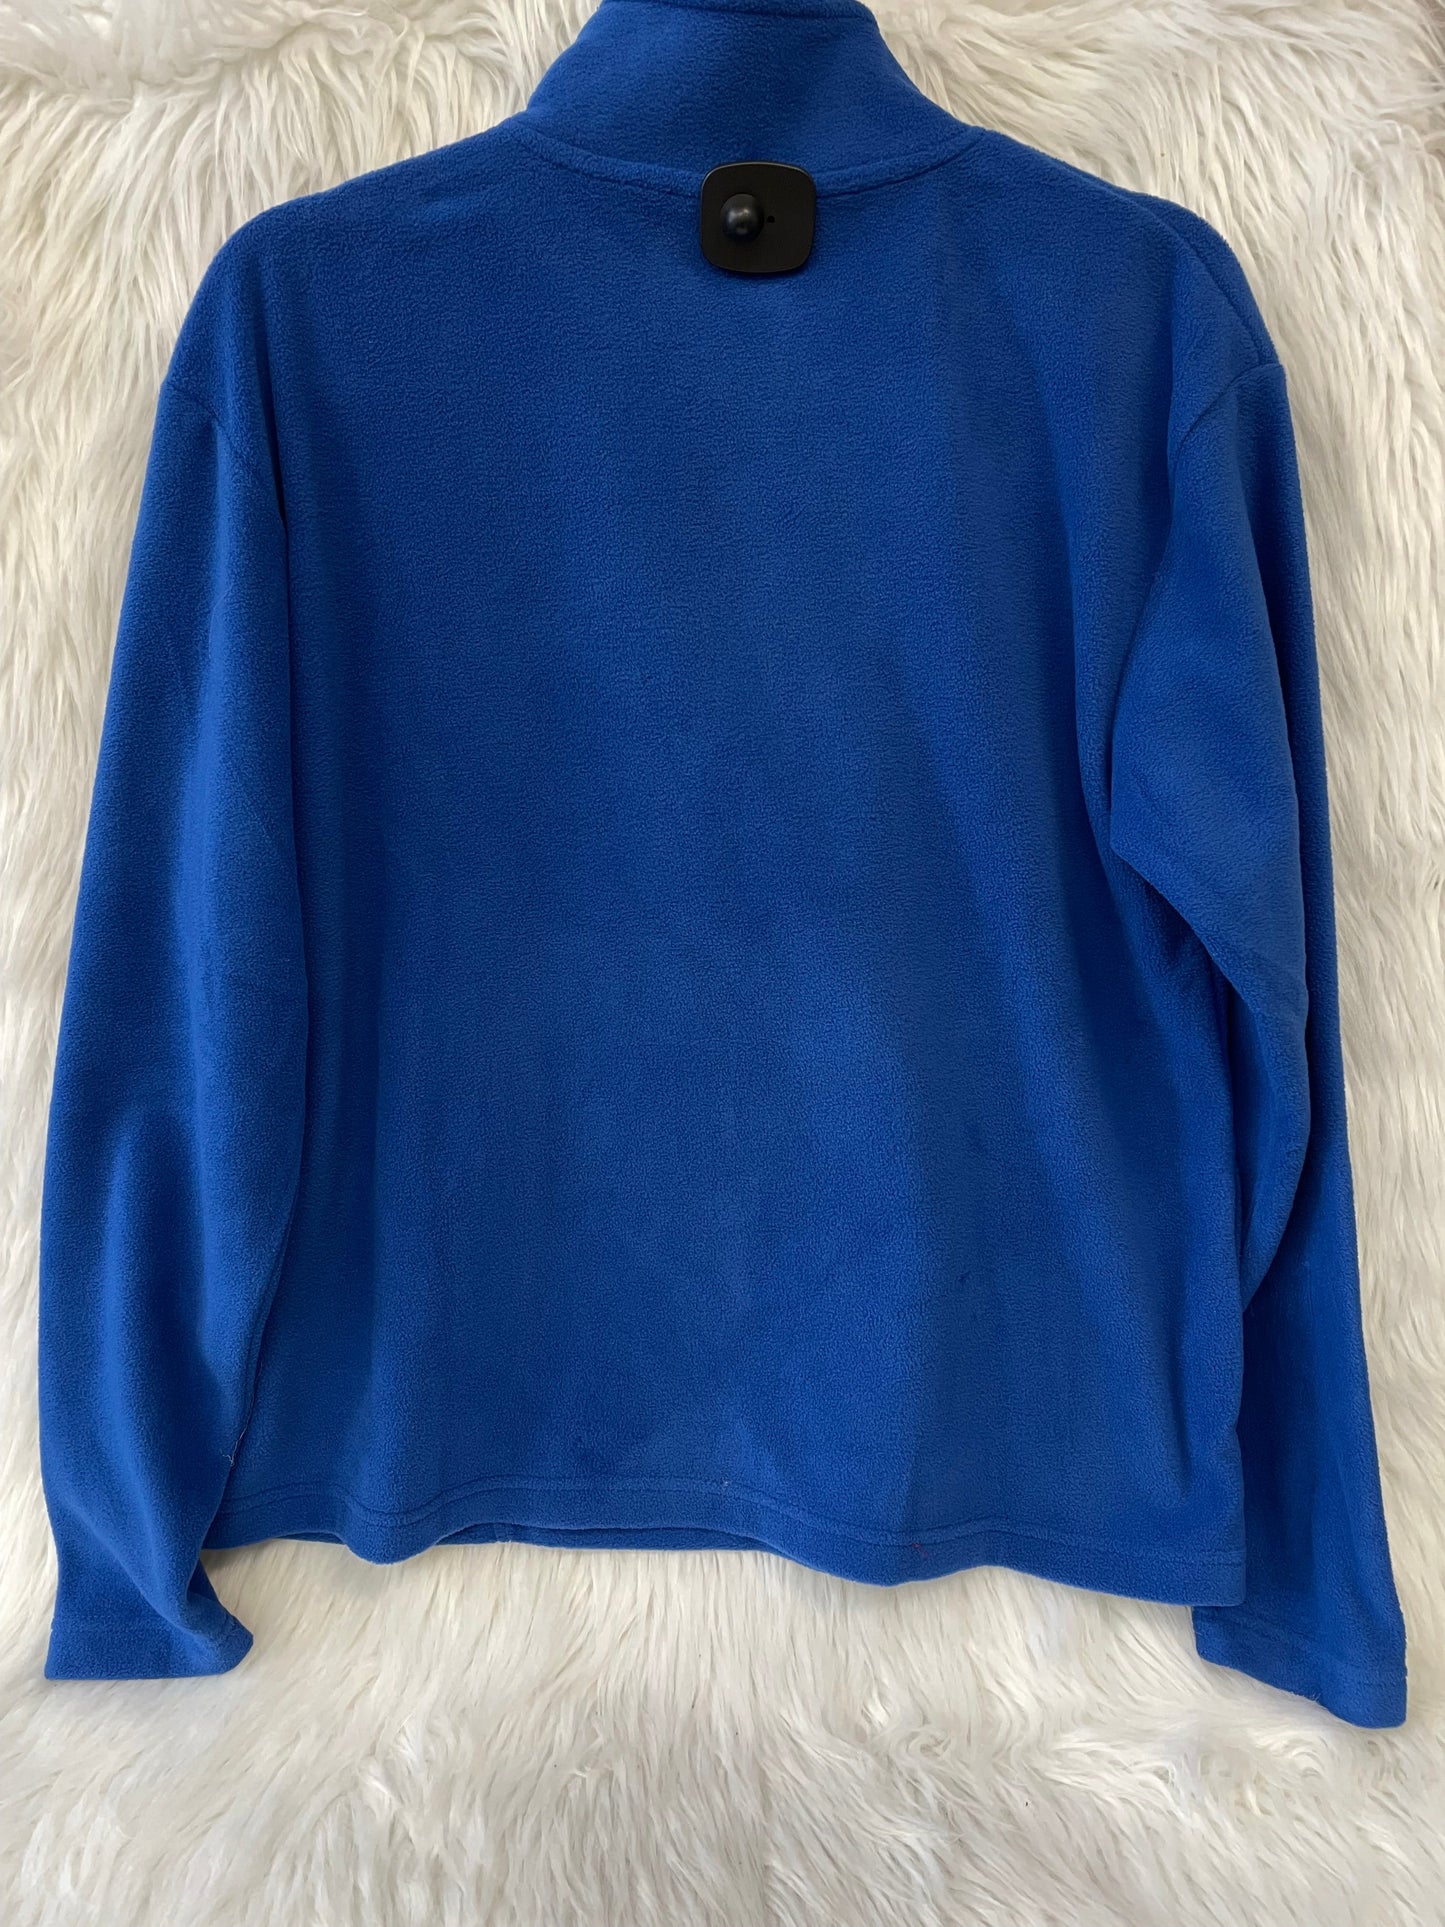 Blue Athletic Top Long Sleeve Collar Clothes Mentor, Size M